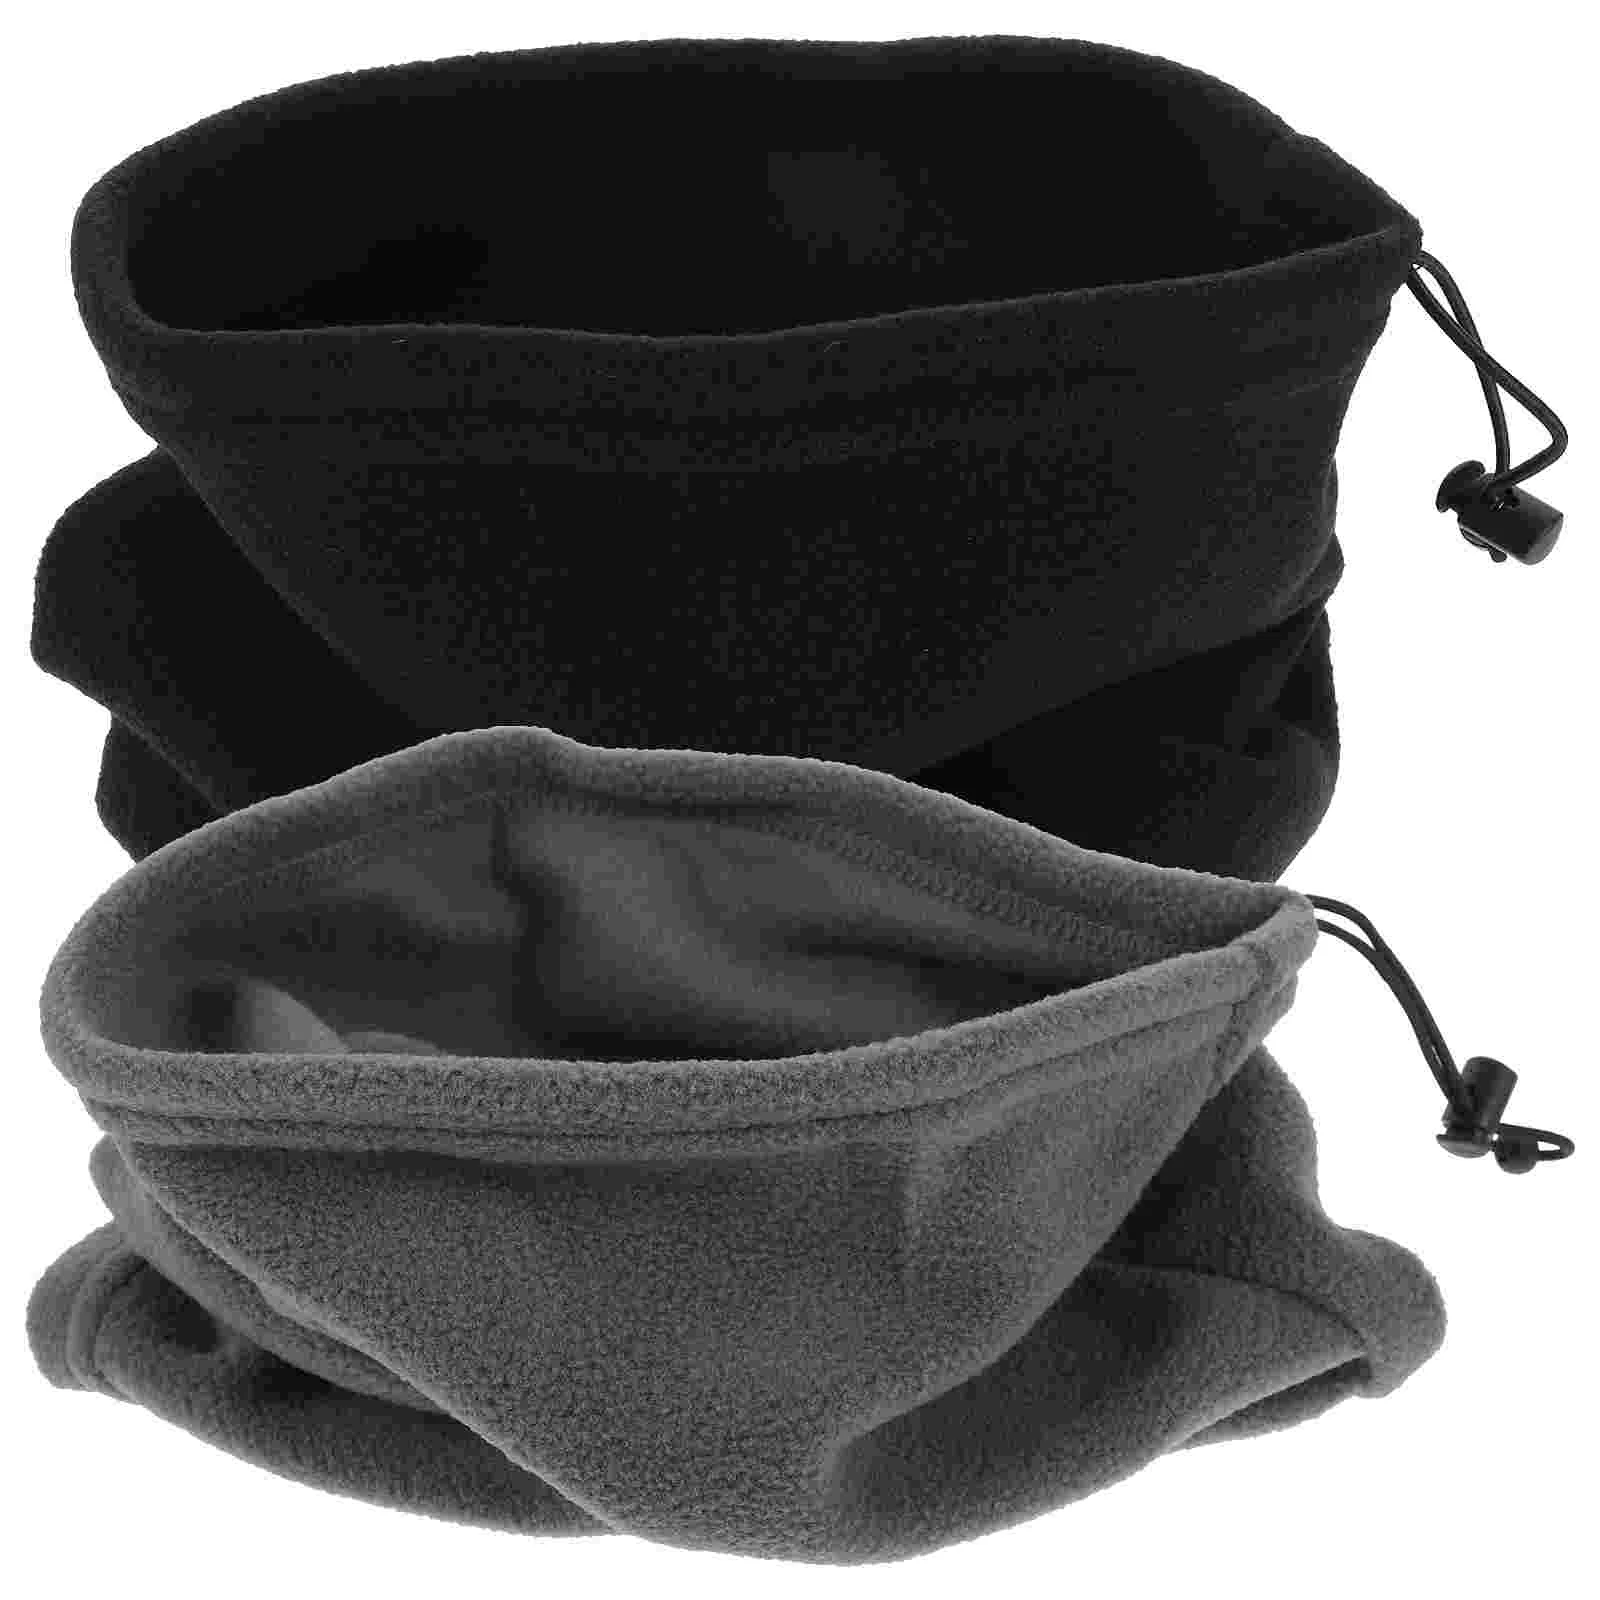 

2 Pcs Headscarf Winter Neck Gaiter Cover Keep Warm Fishing Mask Hiking Outdoor Men and Women